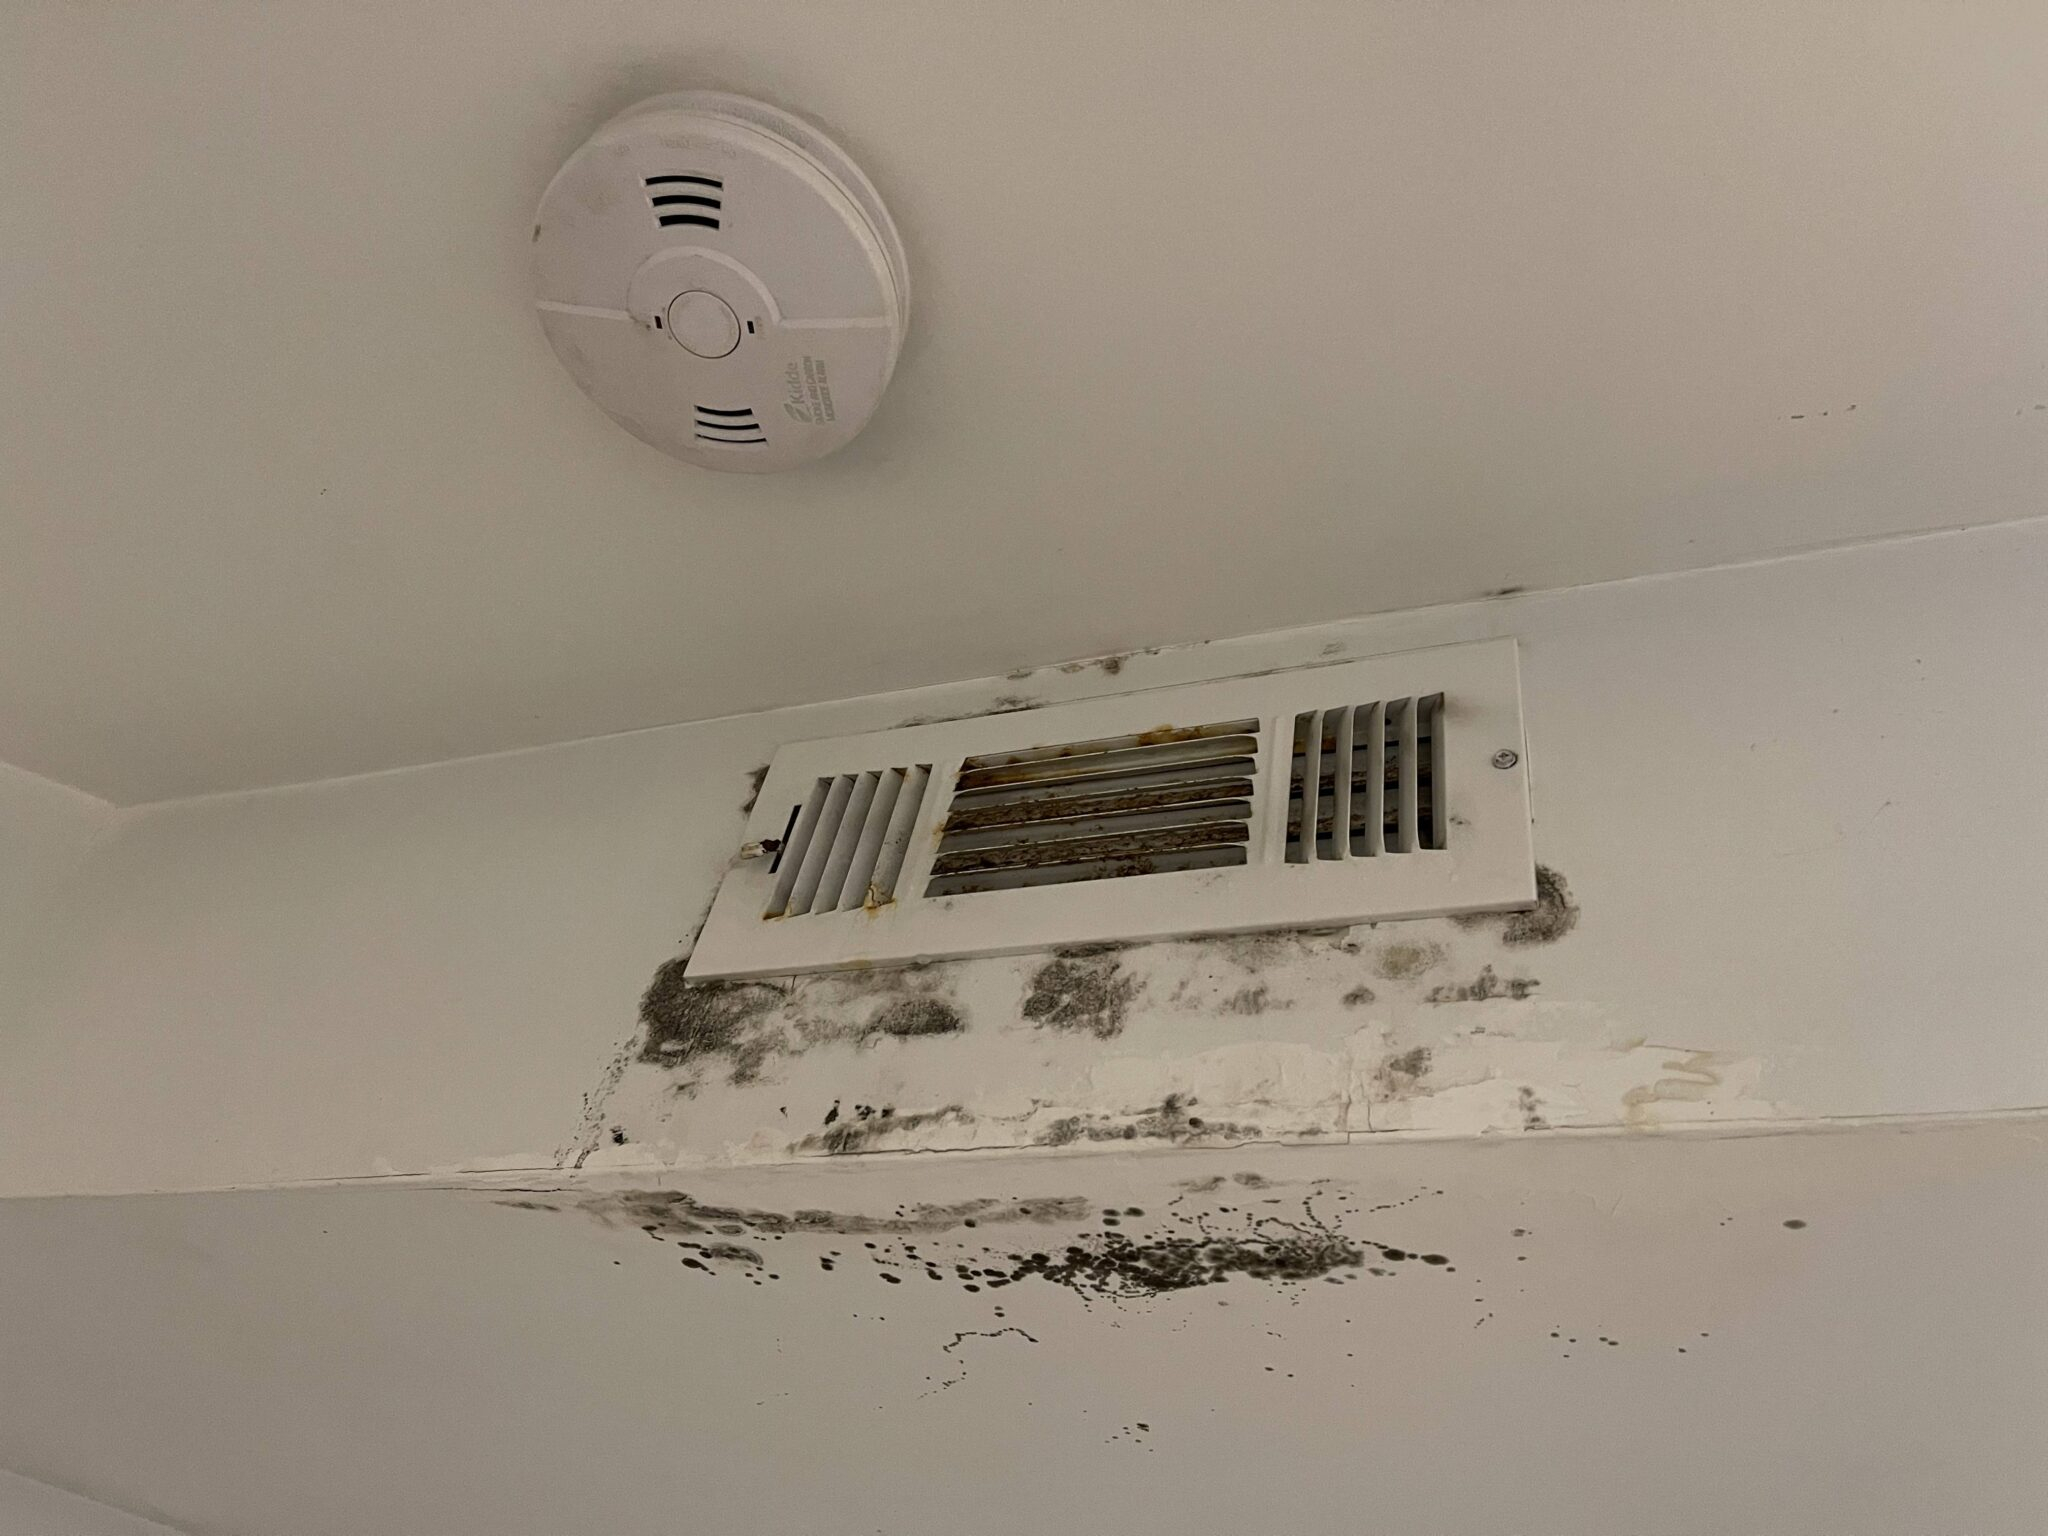 MOLD REMOVAL BOONTON NJ Mold remediation Mold removal service In New Jersey, Connecticut and New York City BenzVac air duct cleaning and dryer vent cleaning 908-294-1501 Mold removal NJ Moisture in Air Ducts, How To Fix This Issue